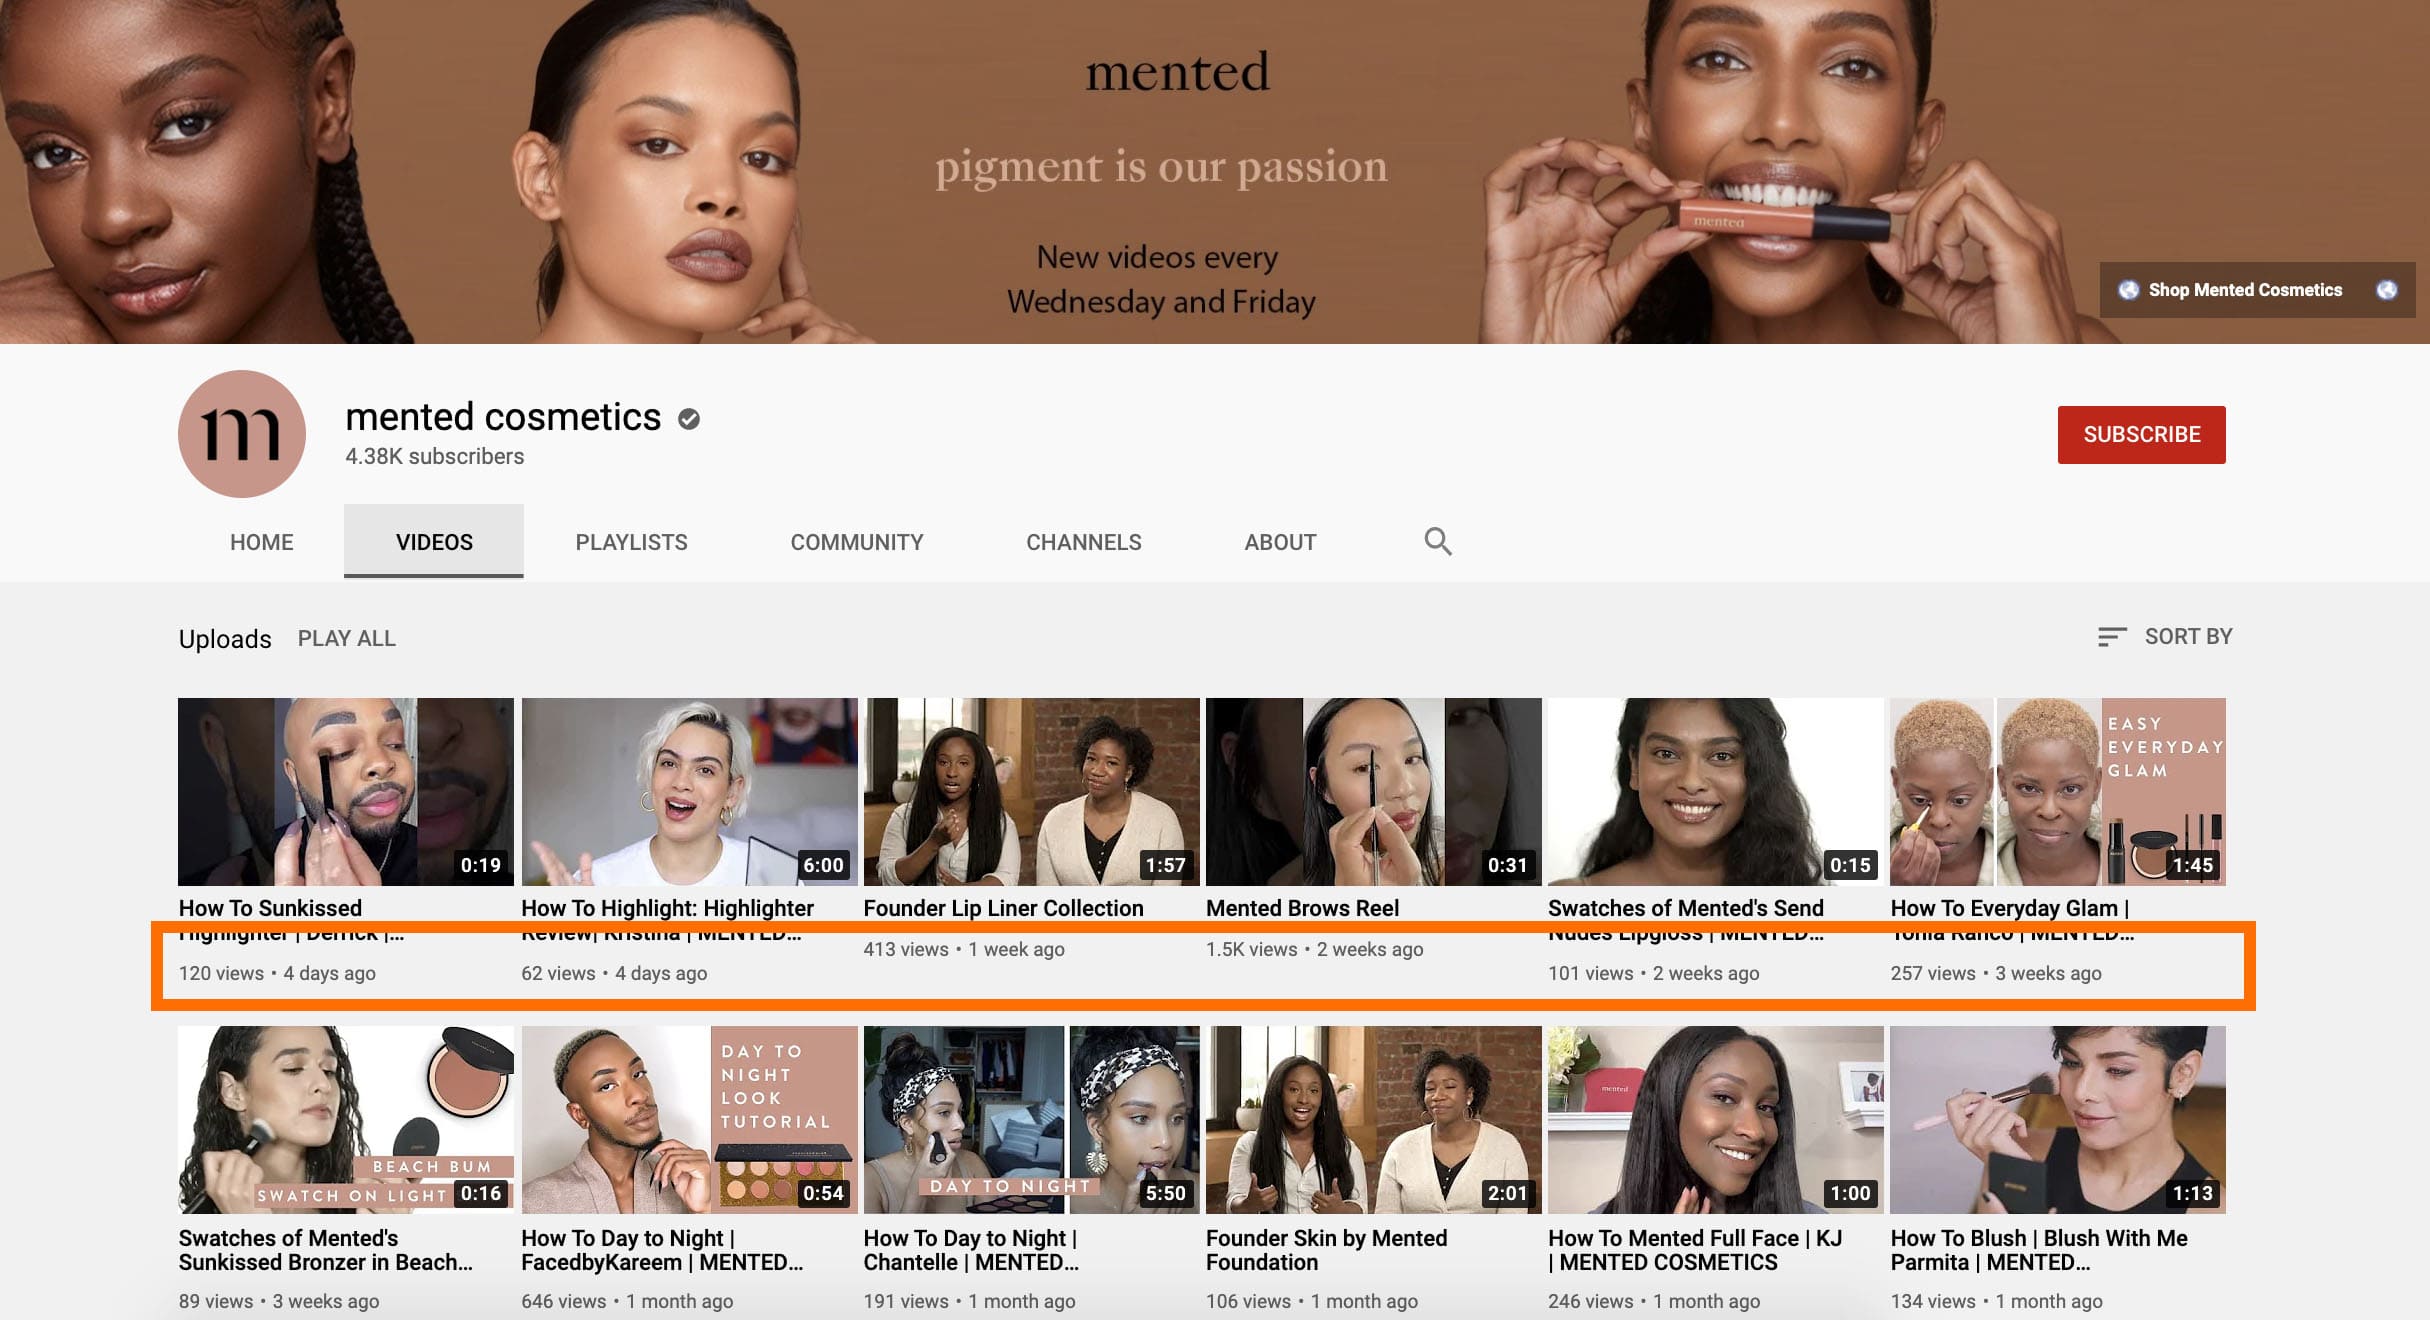 mented cosmetics on youtube with lower publishing volume